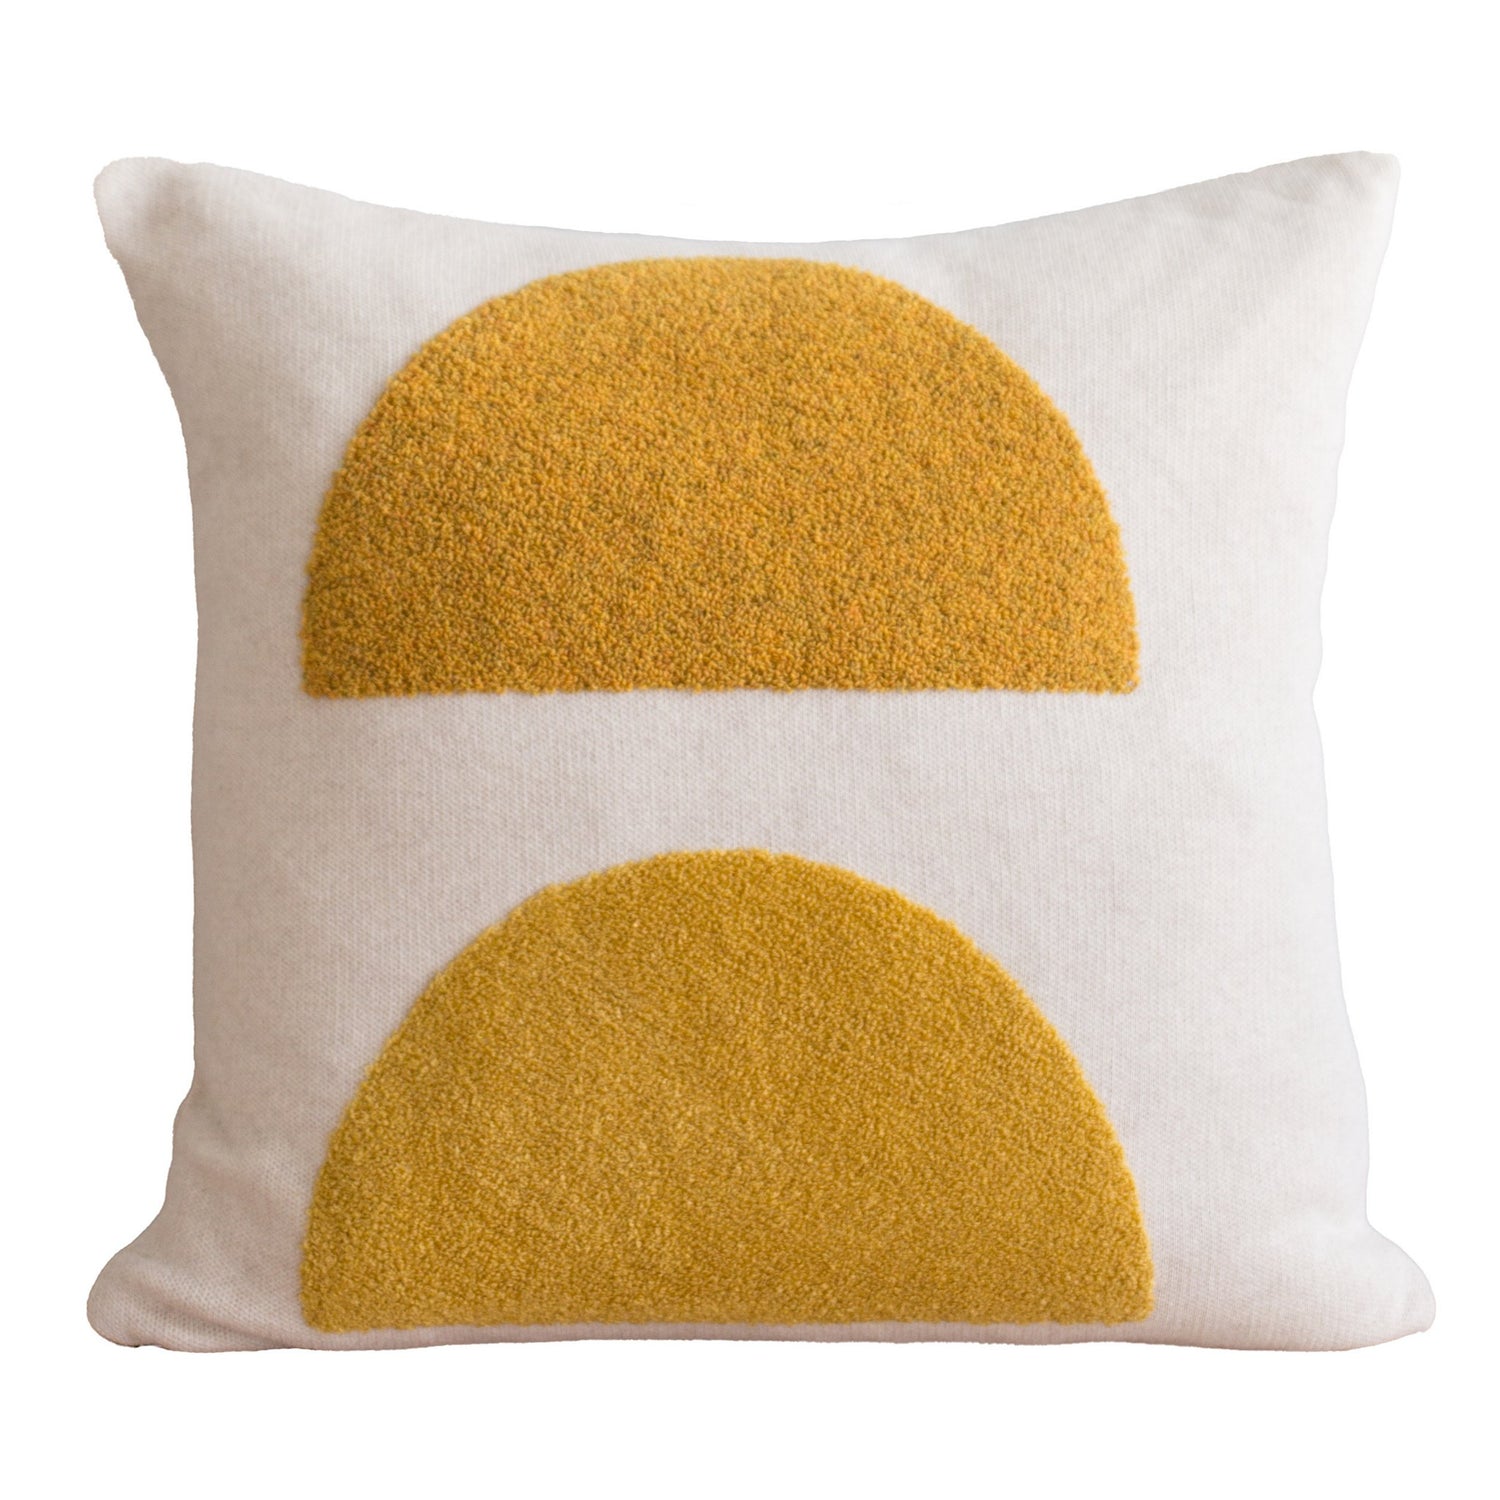 Mona Pillow-cover Yellow, punchneedle embroidery